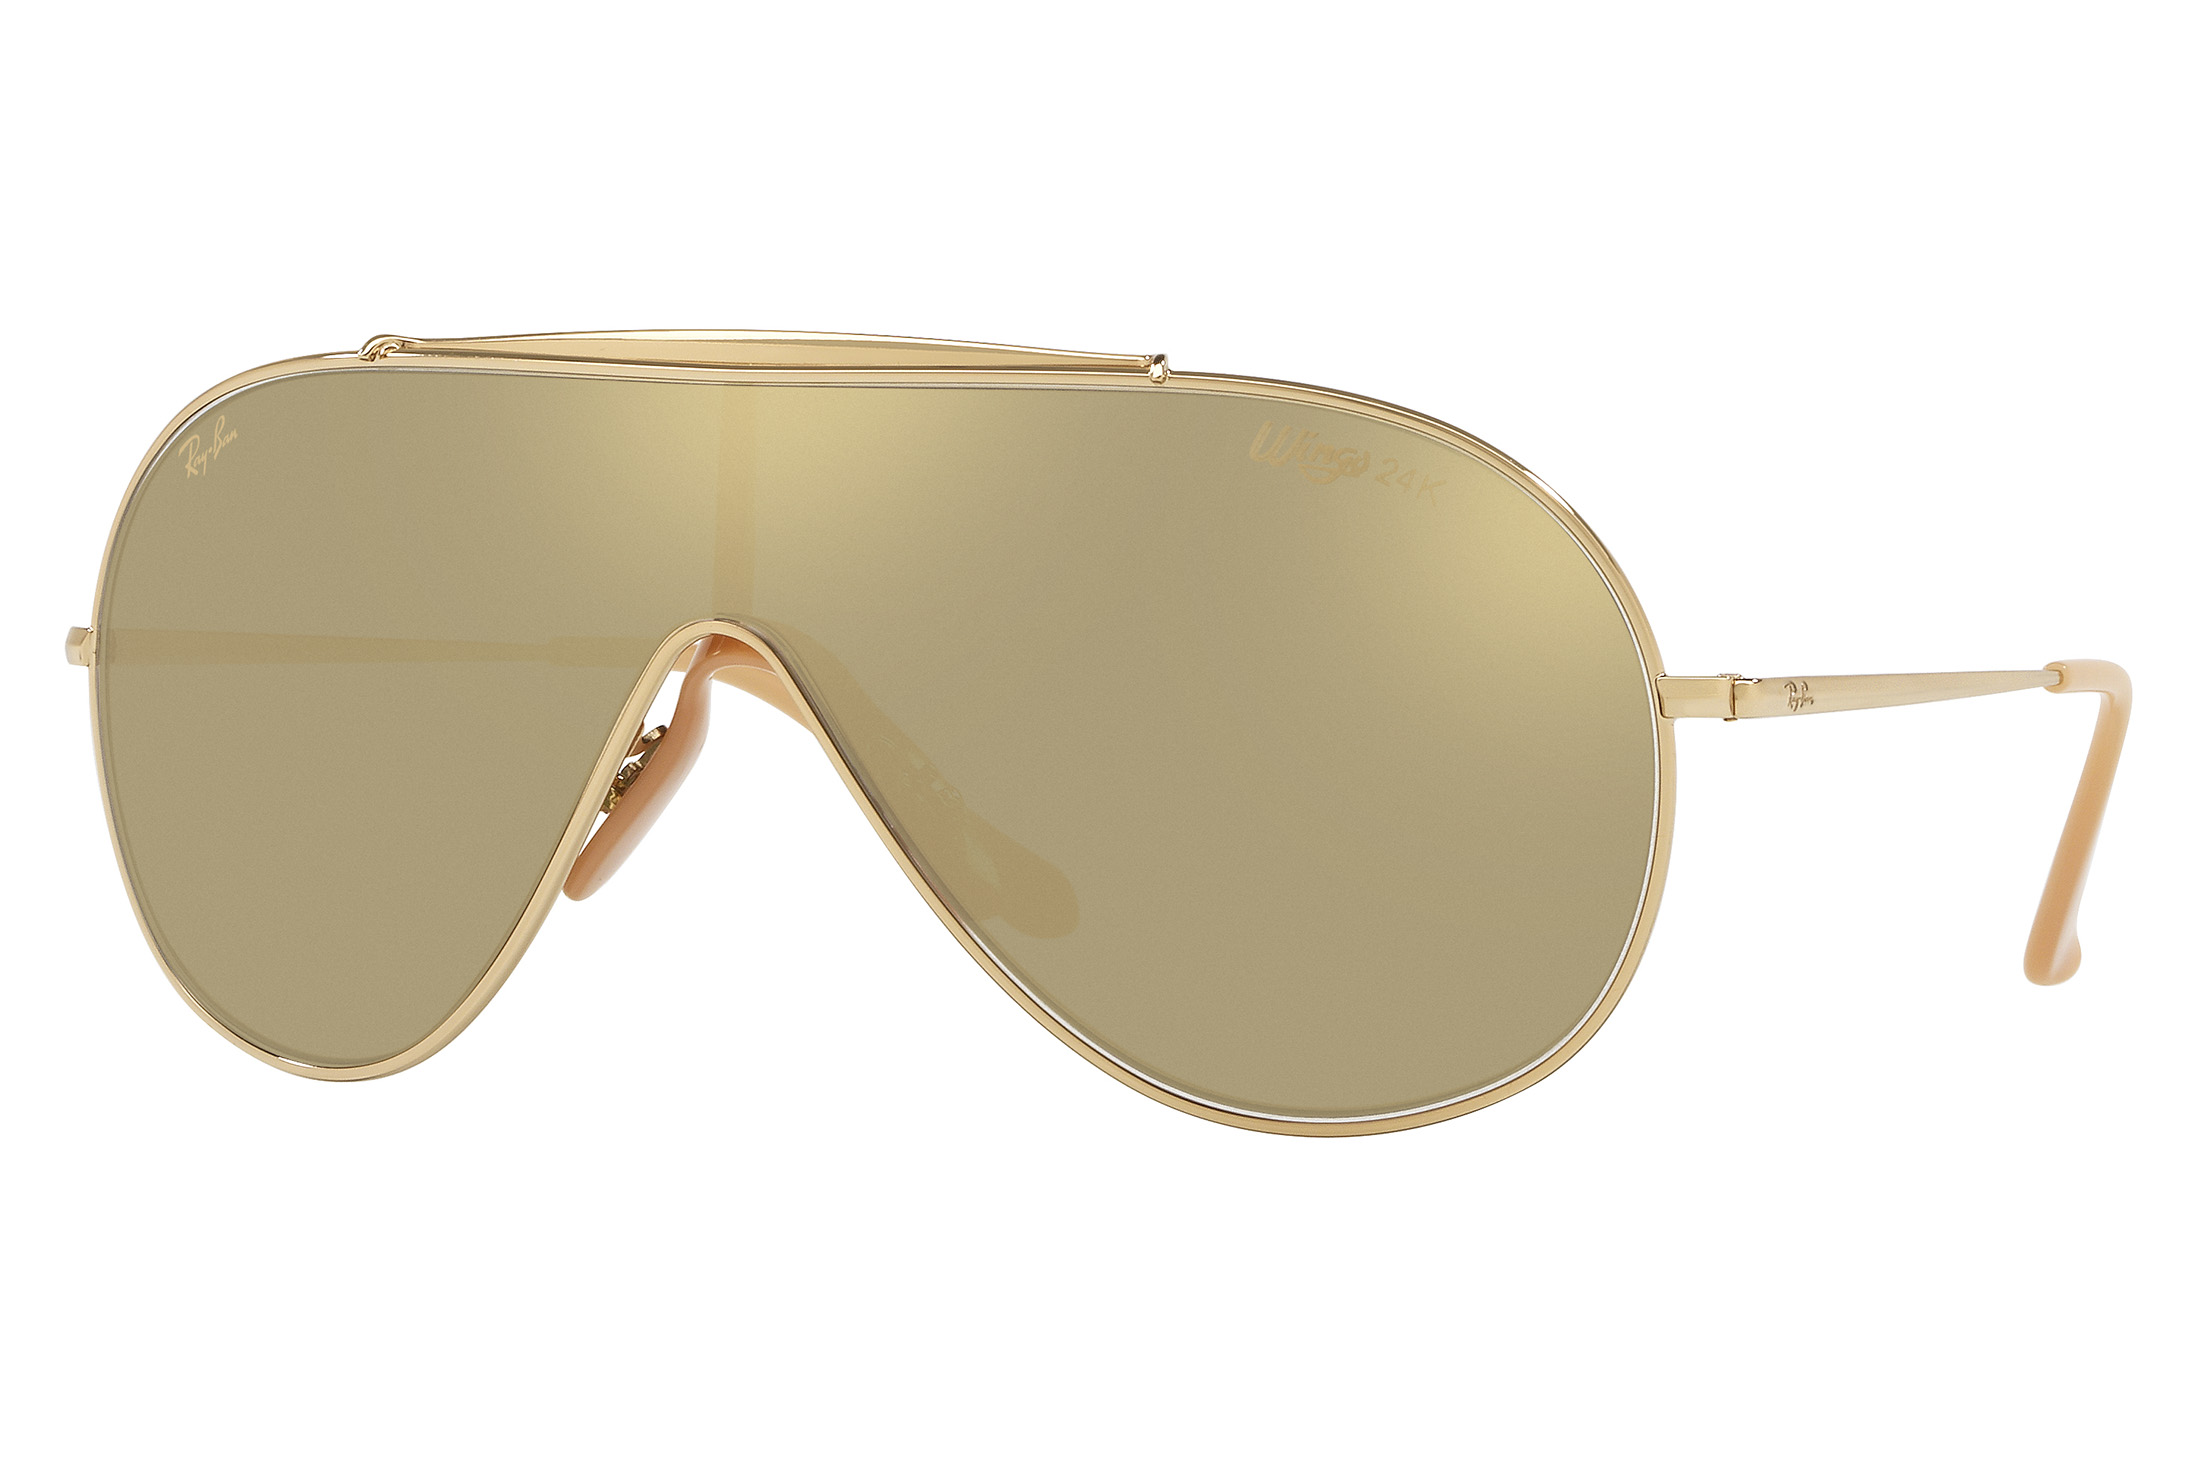 LV Millionaires are the only shades you need in the Summertime